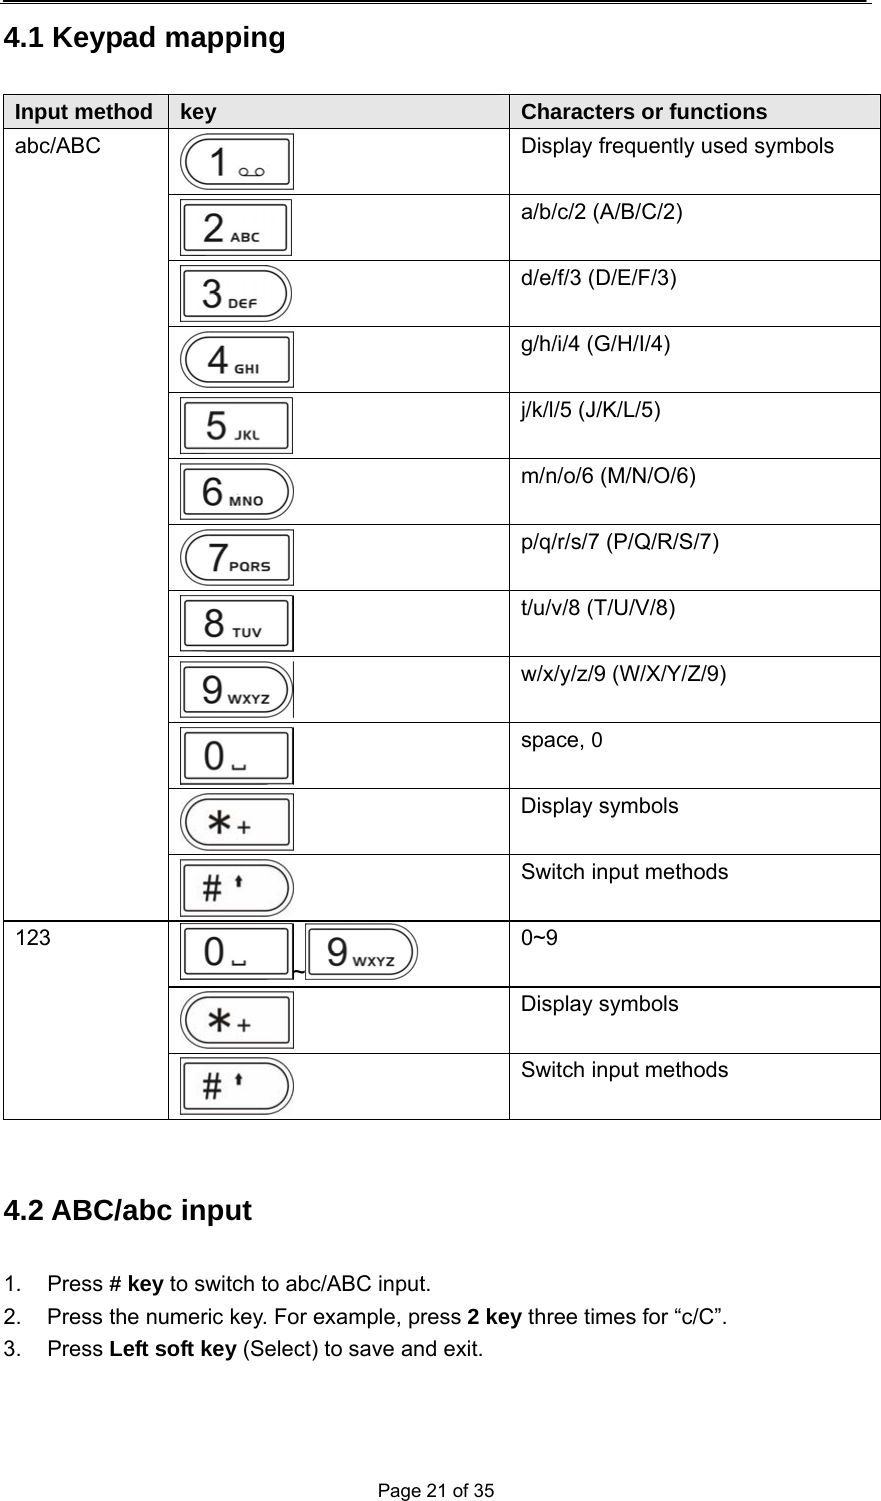  Page 21 of 35 4.1 Keypad mapping Input method  key  Characters or functions  Display frequently used symbols  a/b/c/2 (A/B/C/2)  d/e/f/3 (D/E/F/3)  g/h/i/4 (G/H/I/4)  j/k/l/5 (J/K/L/5)  m/n/o/6 (M/N/O/6)  p/q/r/s/7 (P/Q/R/S/7)  t/u/v/8 (T/U/V/8)  w/x/y/z/9 (W/X/Y/Z/9)  space, 0    Display symbols abc/ABC  Switch input methods ~ 0~9  Display symbols 123  Switch input methods  4.2 ABC/abc input   1. Press # key to switch to abc/ABC input. 2.  Press the numeric key. For example, press 2 key three times for “c/C”. 3. Press Left soft key (Select) to save and exit. 